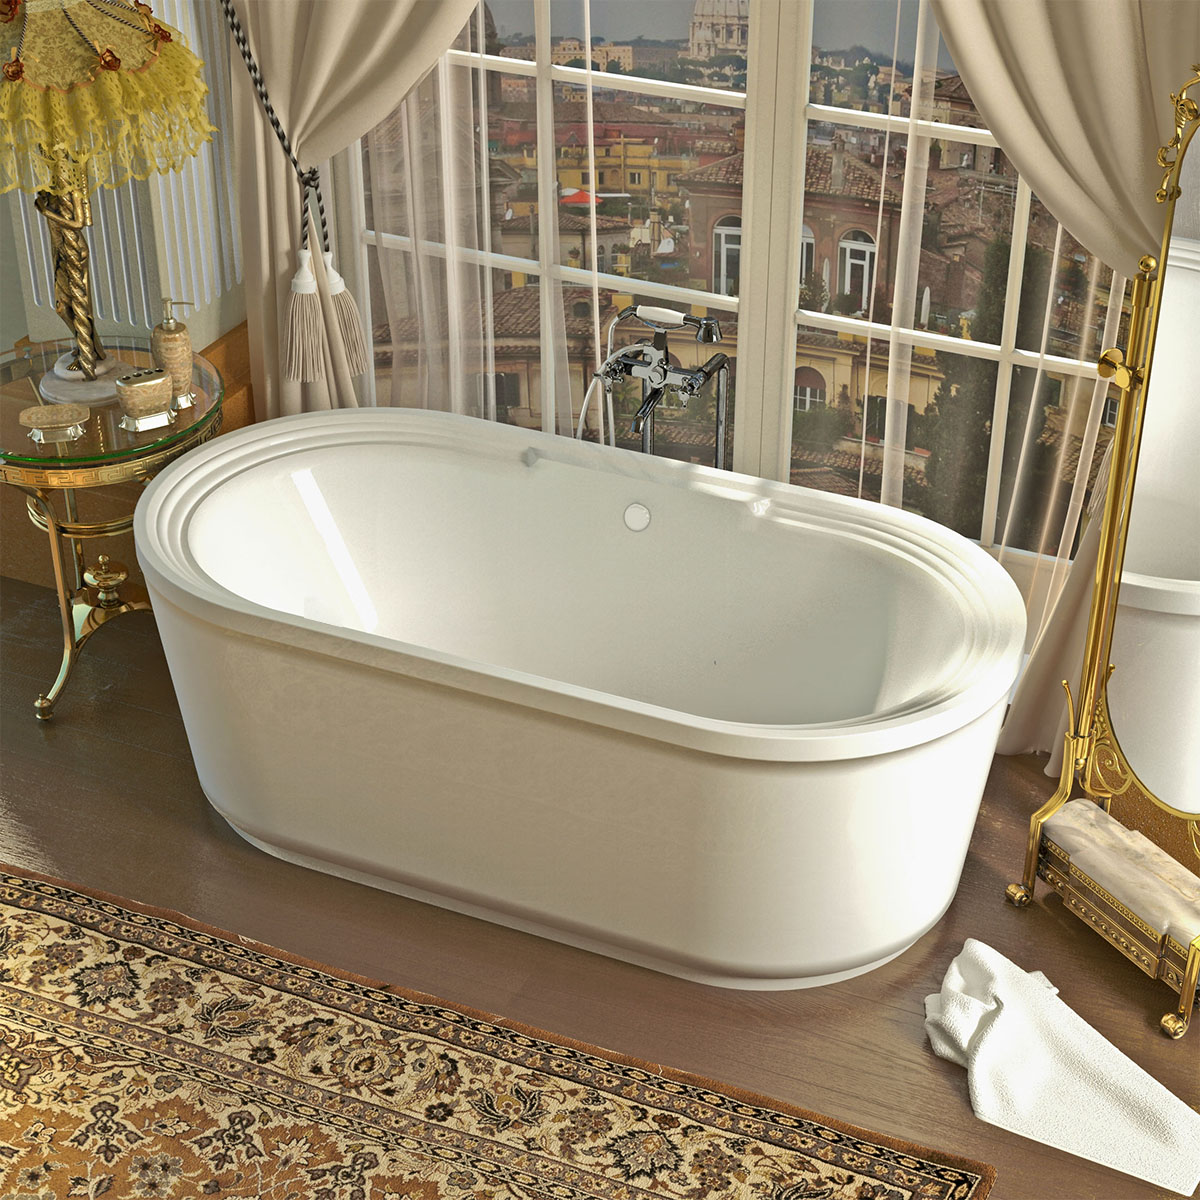 Padre 34 x 67 x 21 in. Oval Freestanding Air Jetted Bathtub